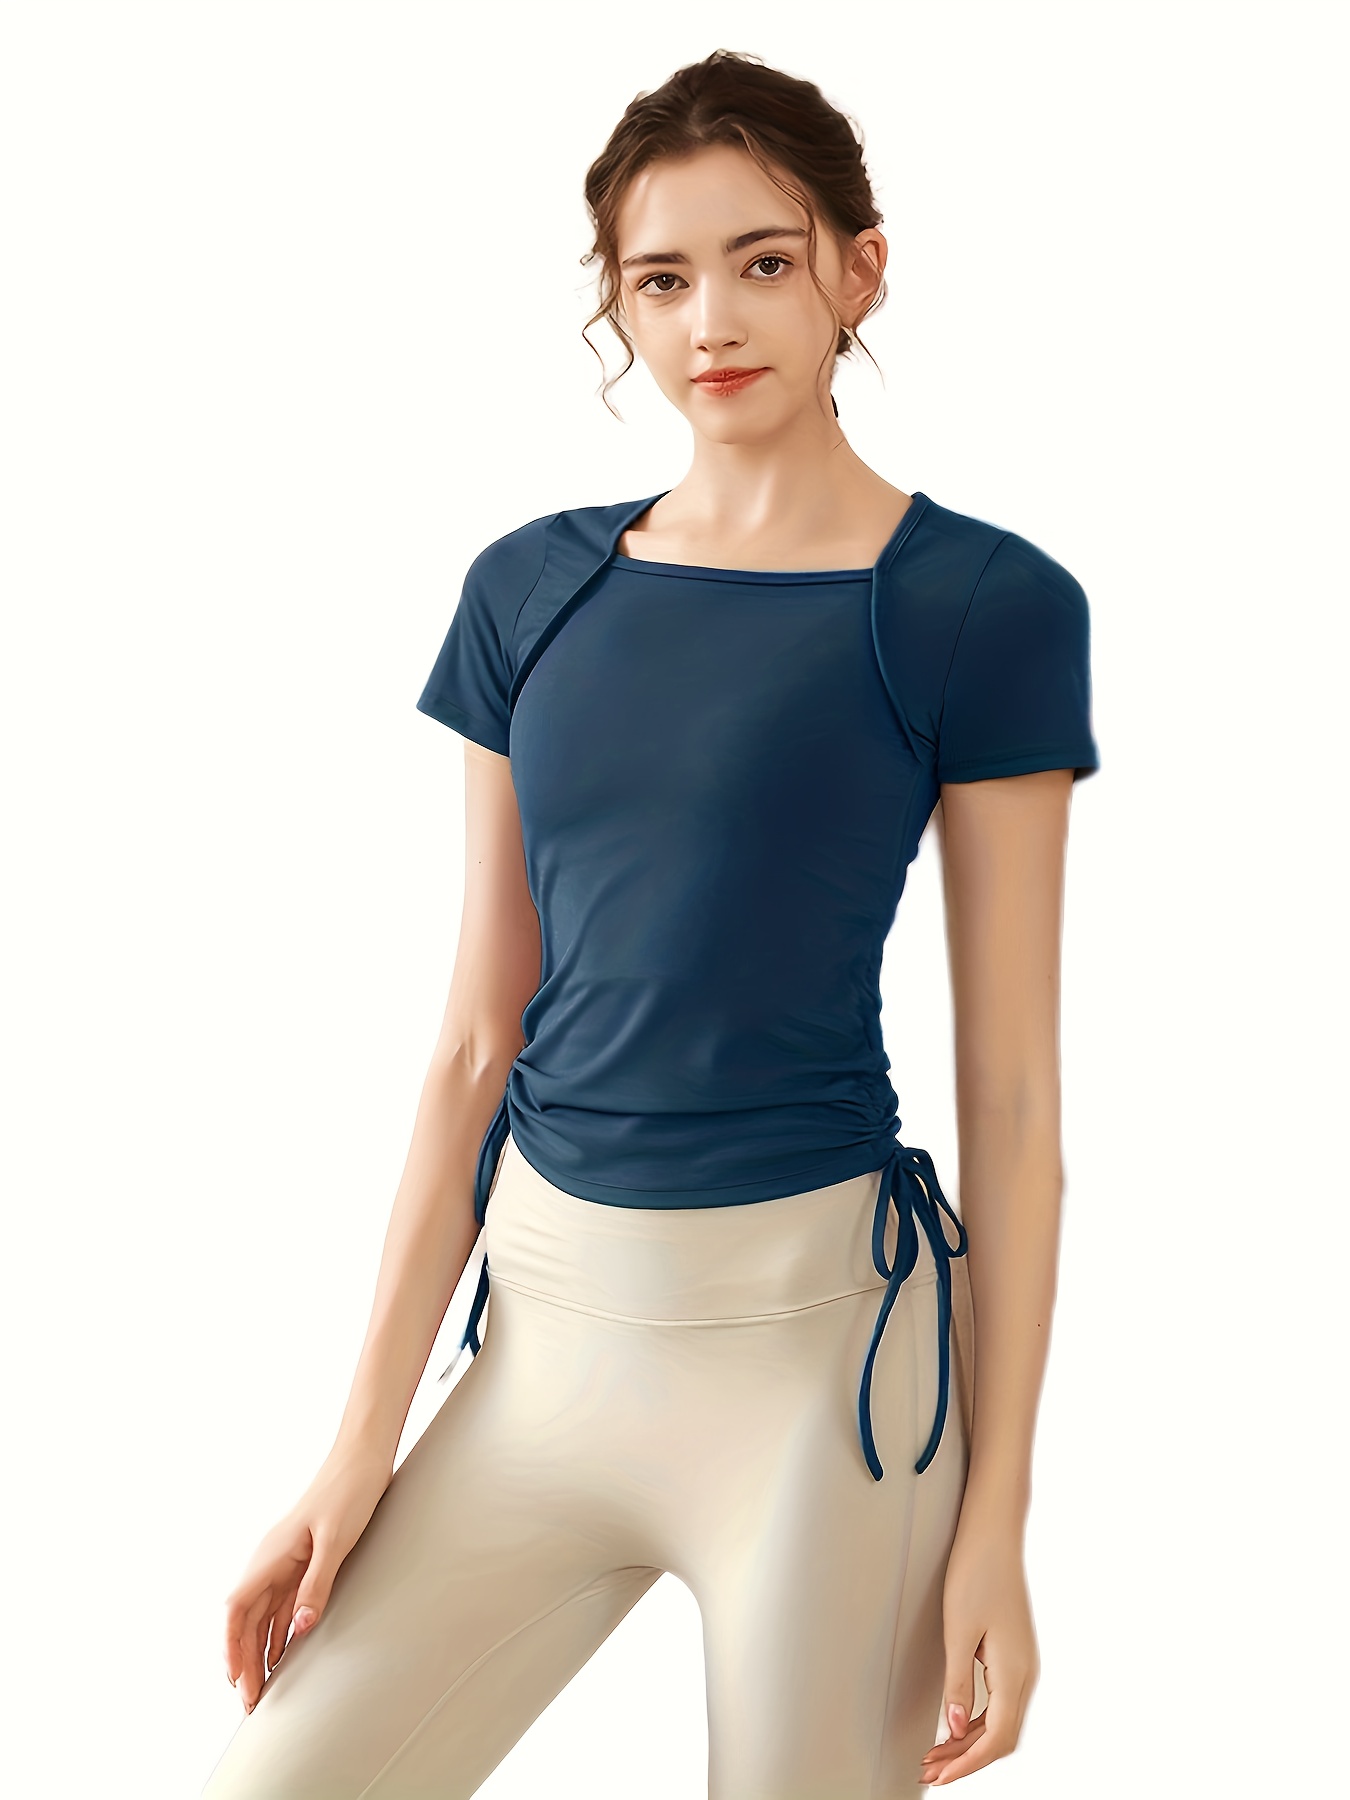 Drawstring Tie Side Yoga Top, Short Sleeves Slim Fit High Stretch Sporty  T-Shirt, Women's Activewear